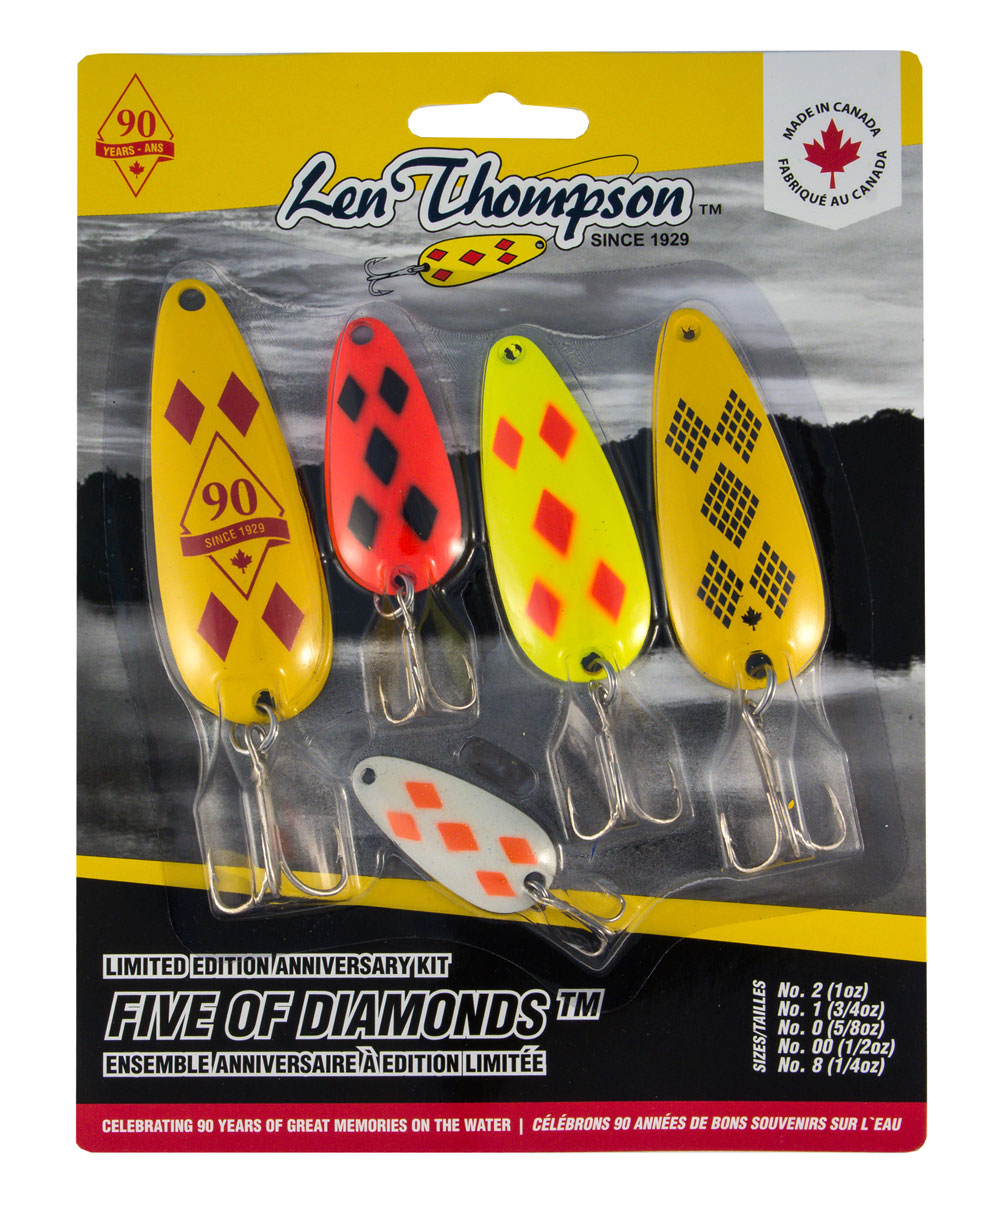 Canadian Lures - Canadian Vintage Fishing Tackle & History